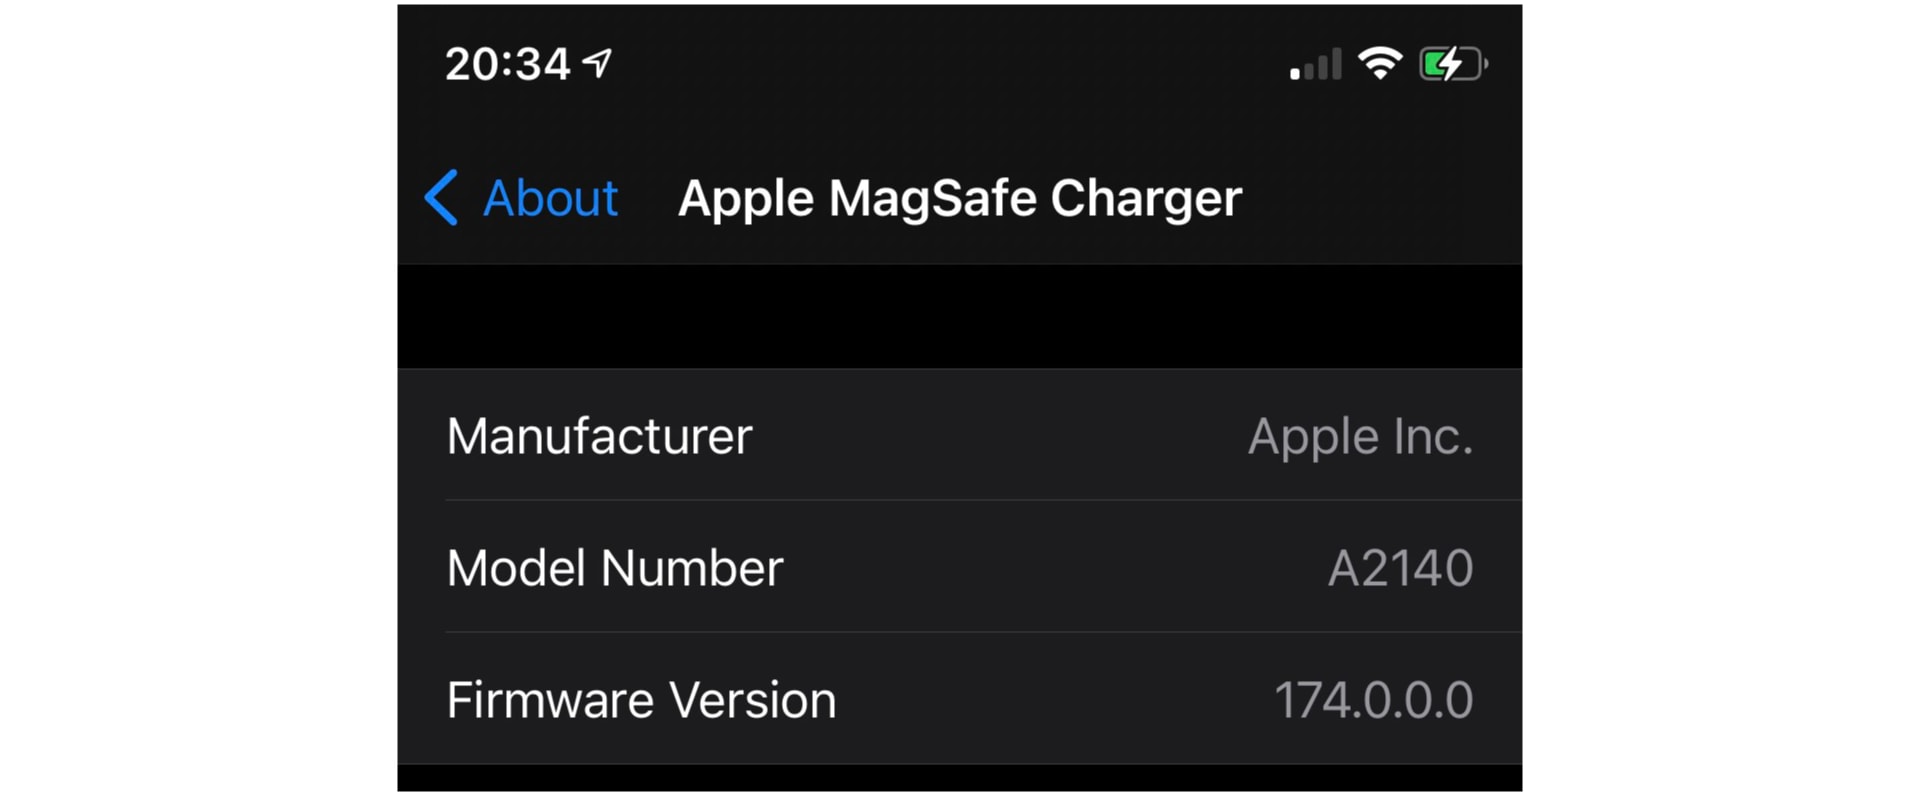 Check your MagSafe Charger for iPhone is genuine